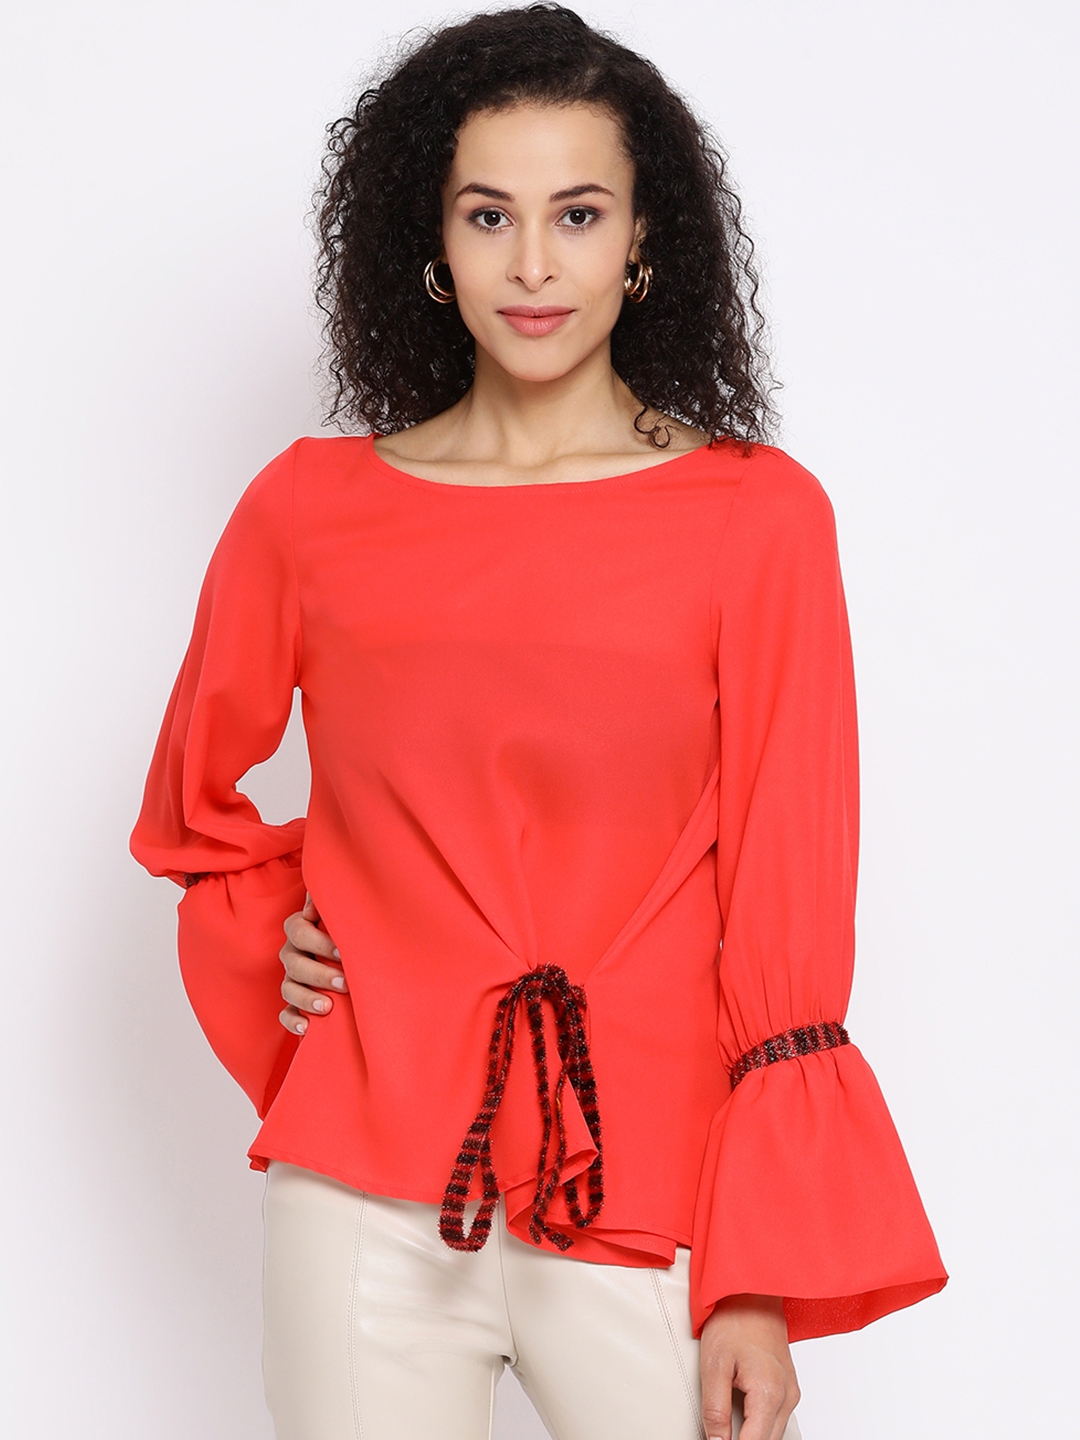 DRAAX fashions | Draax Fashions Women Red Embellished A-Line Top